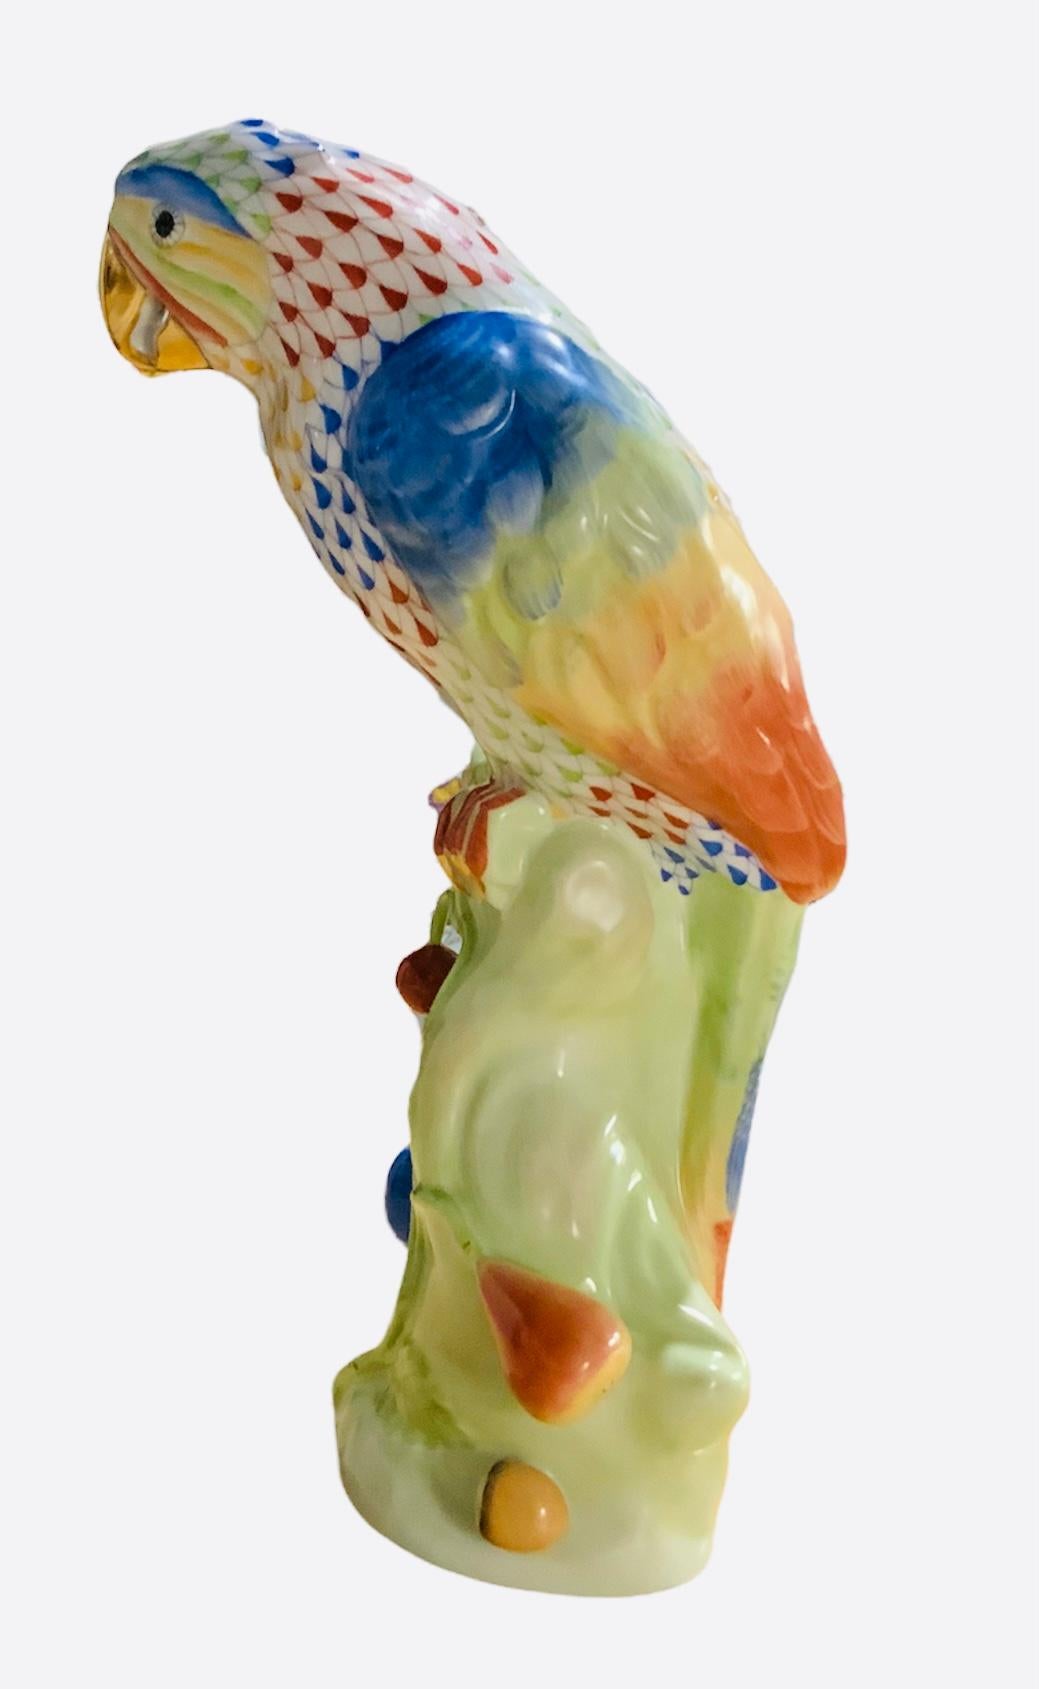 This is a hand painted Herend porcelain parrot. Its background is white and adorned with tropical colors of orange, blue, green, & yellow fish scale net pattern. Also it’s feathers follow the same colors. It is standing over a wood branch that have